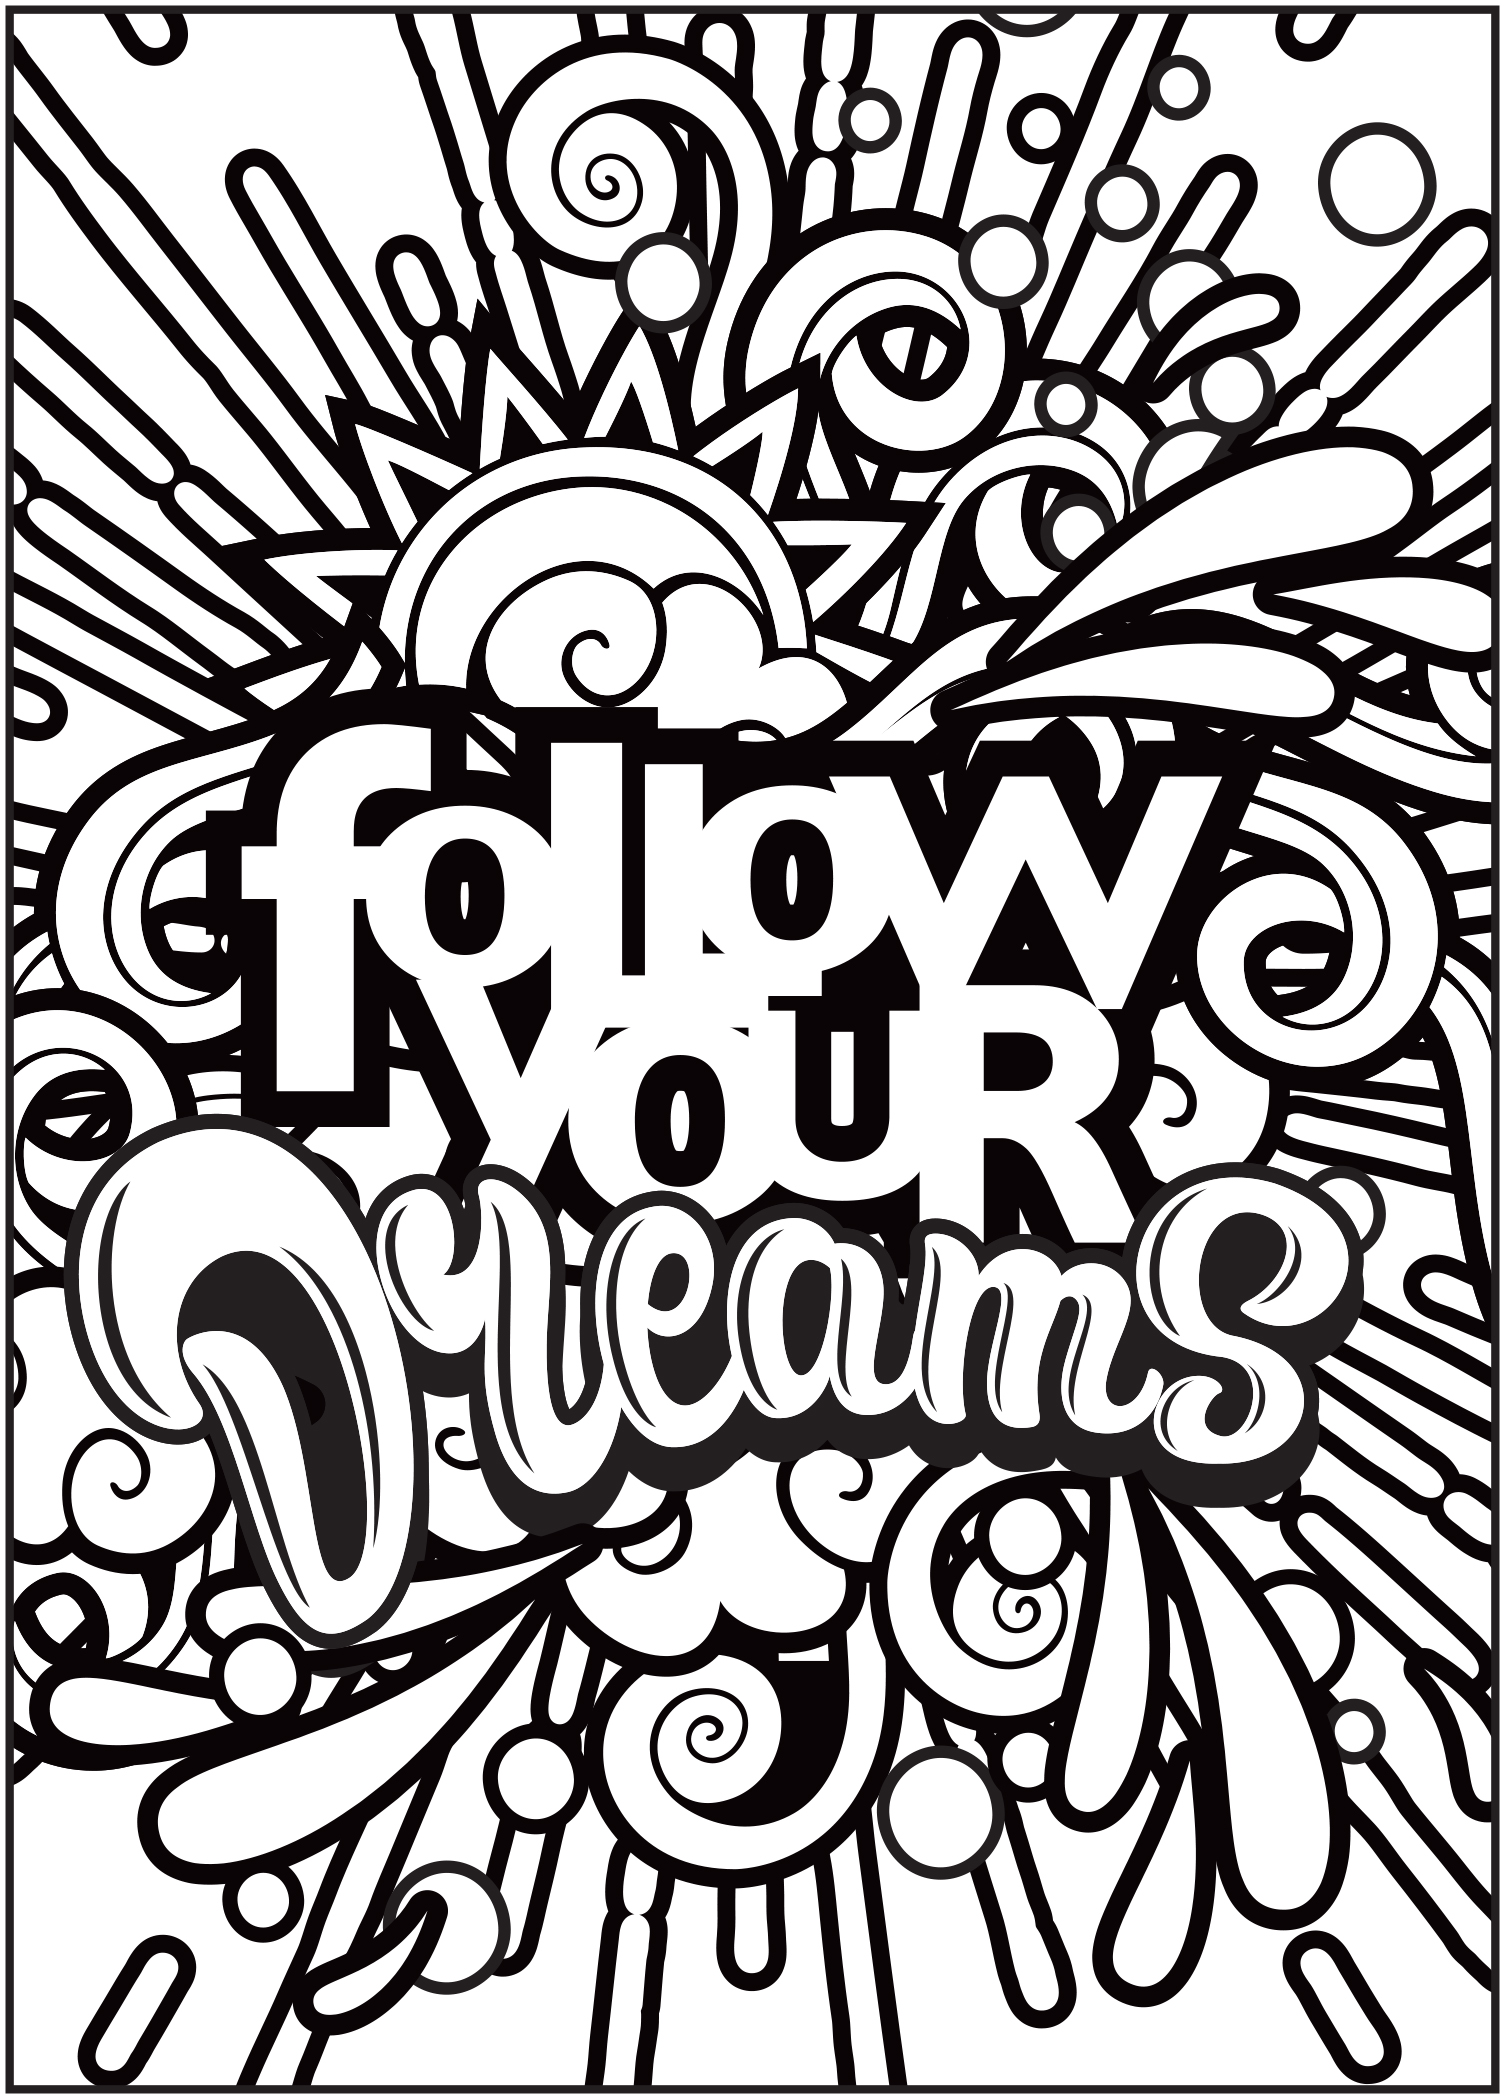 Cra-Z-Art: Timeless Creations Follow Your Dreams Coloring Book, 64 ...